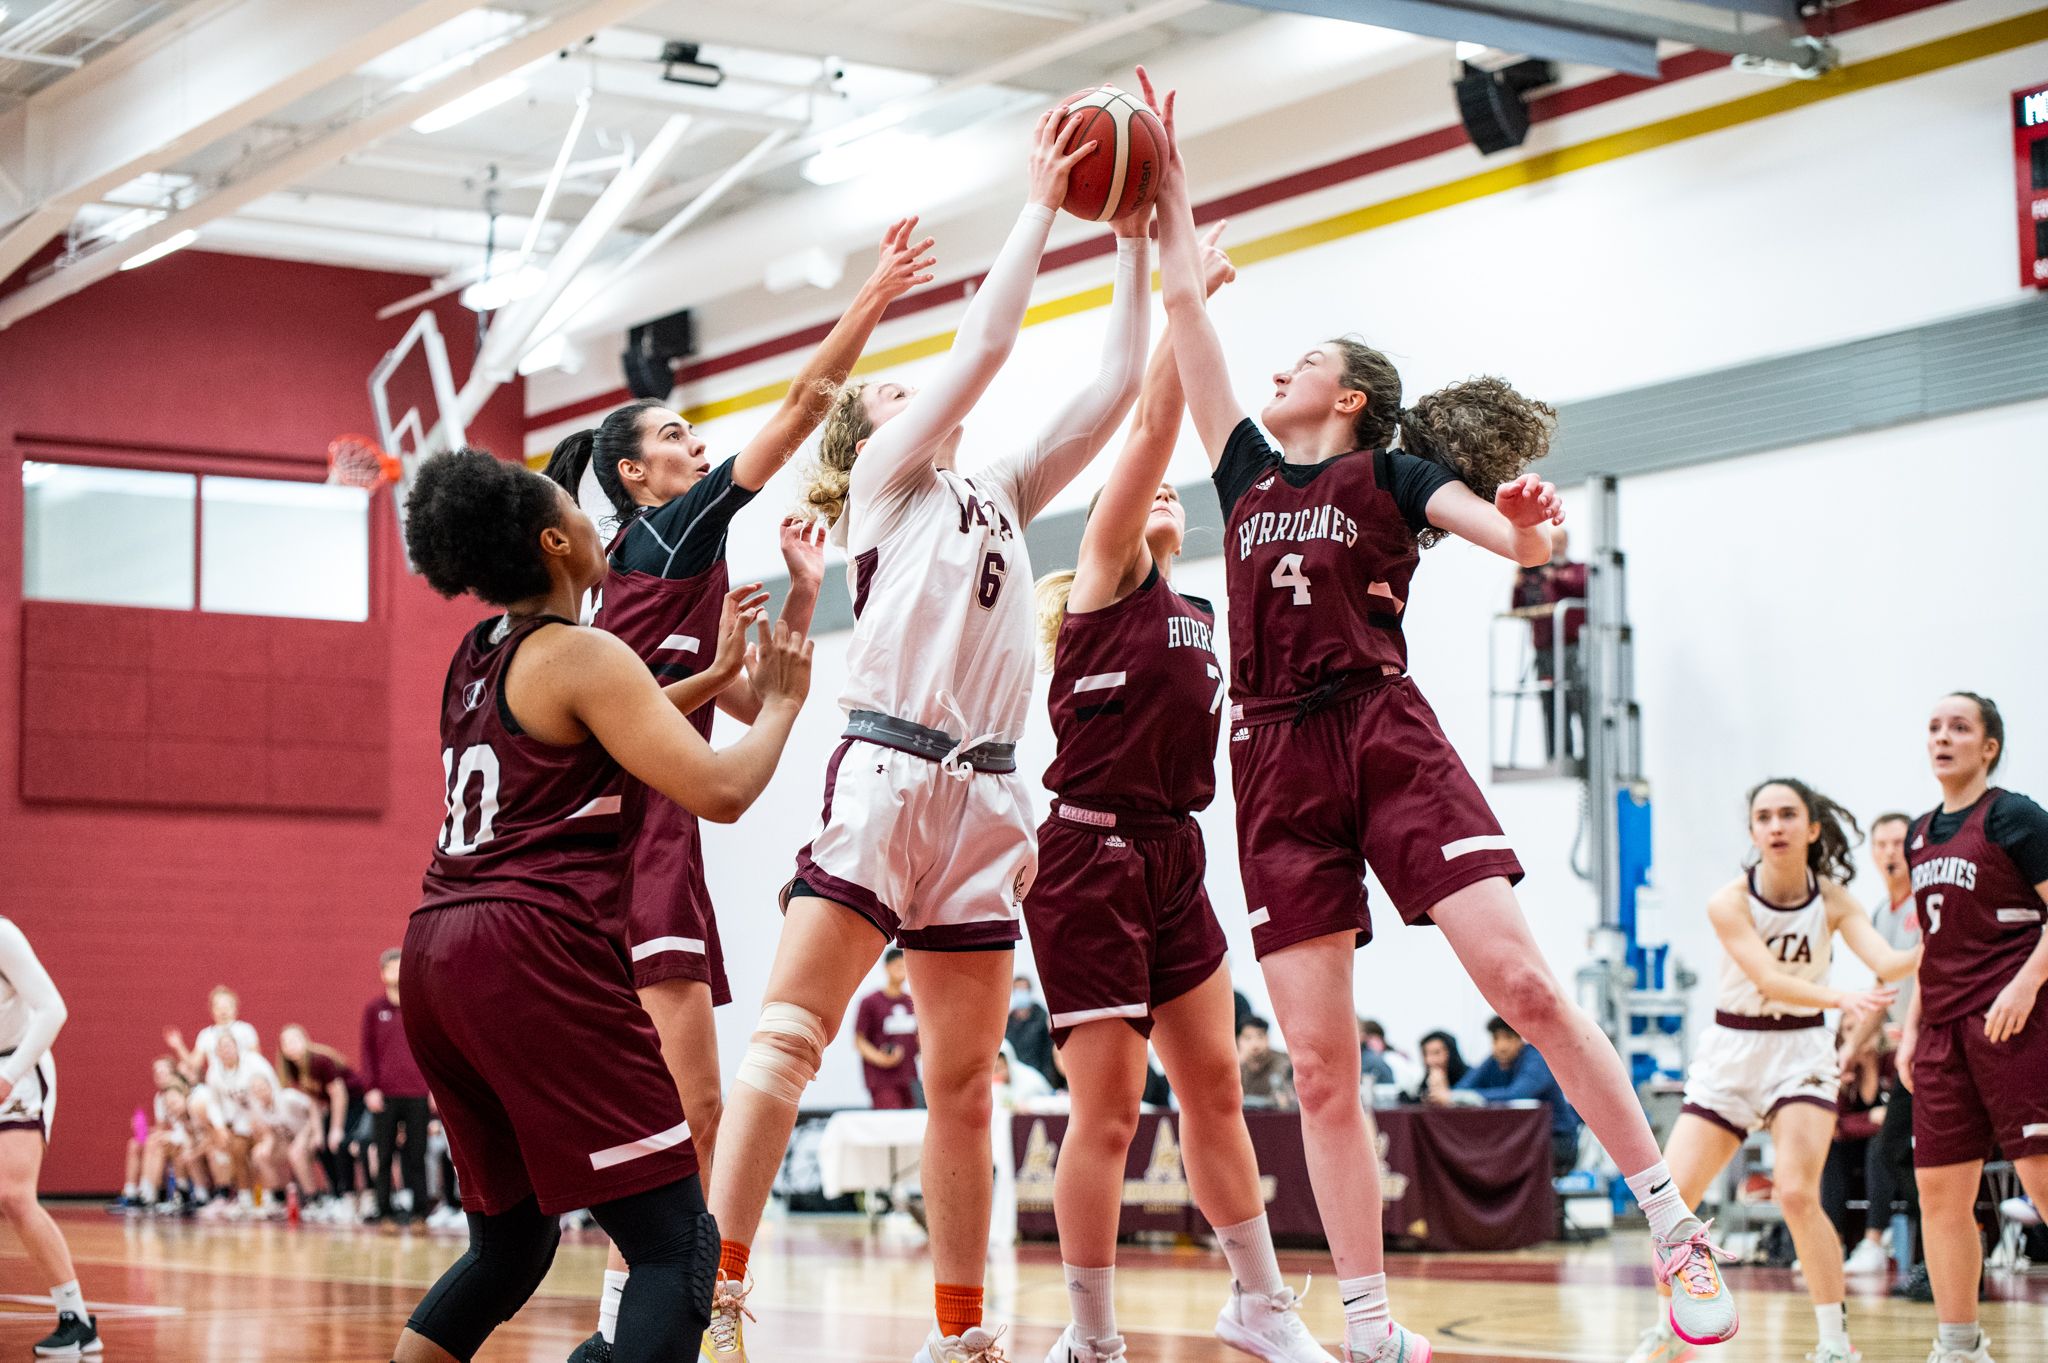 Mounties break in new gym with win against Hurricanes